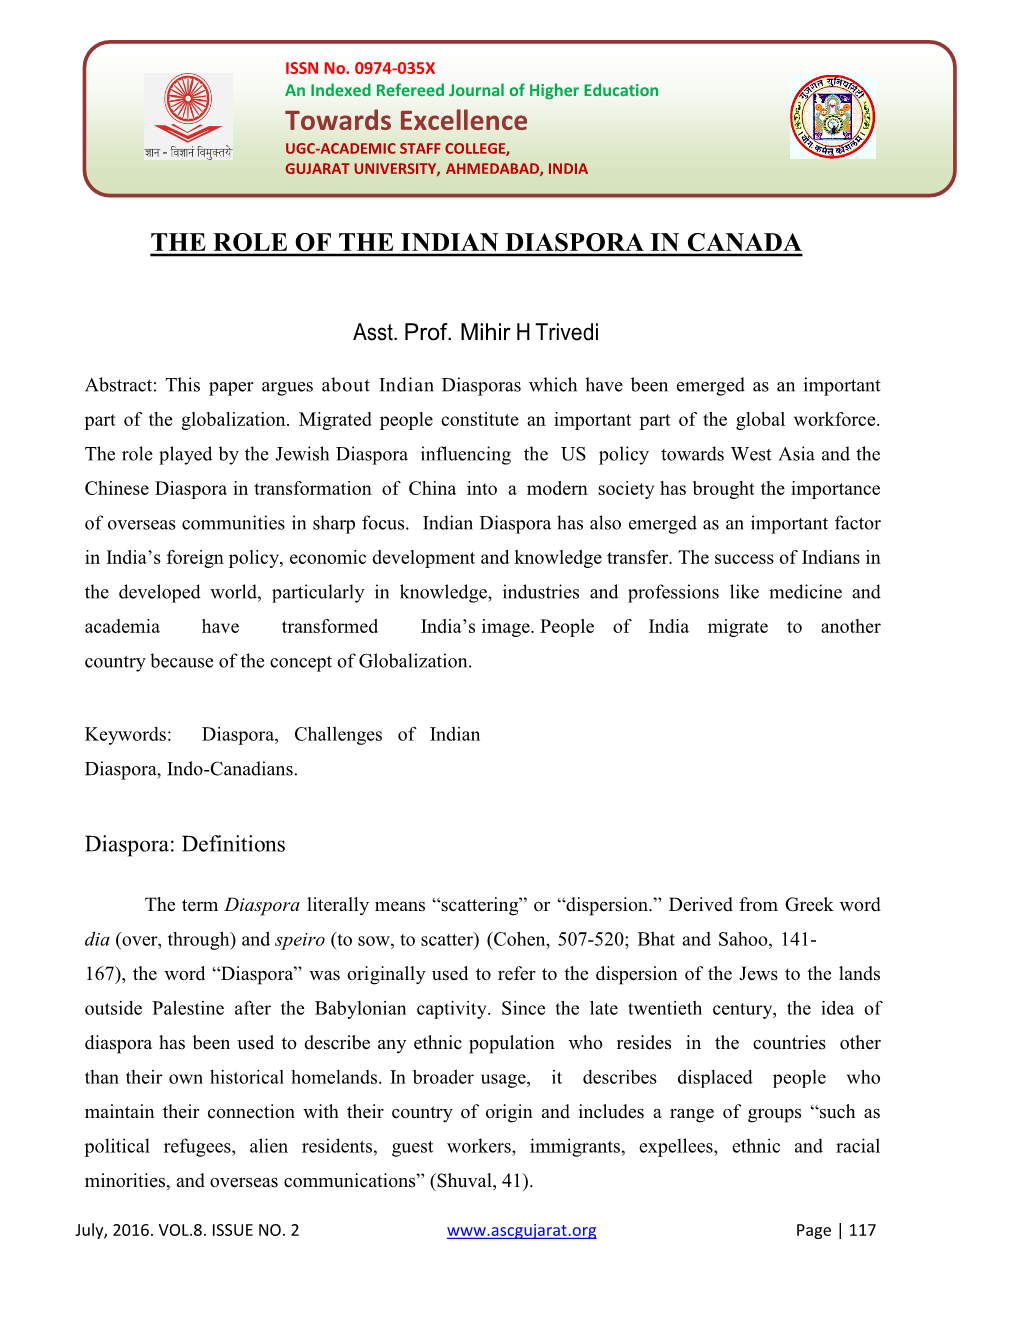 The Role of the Indian Diaspora in Canada